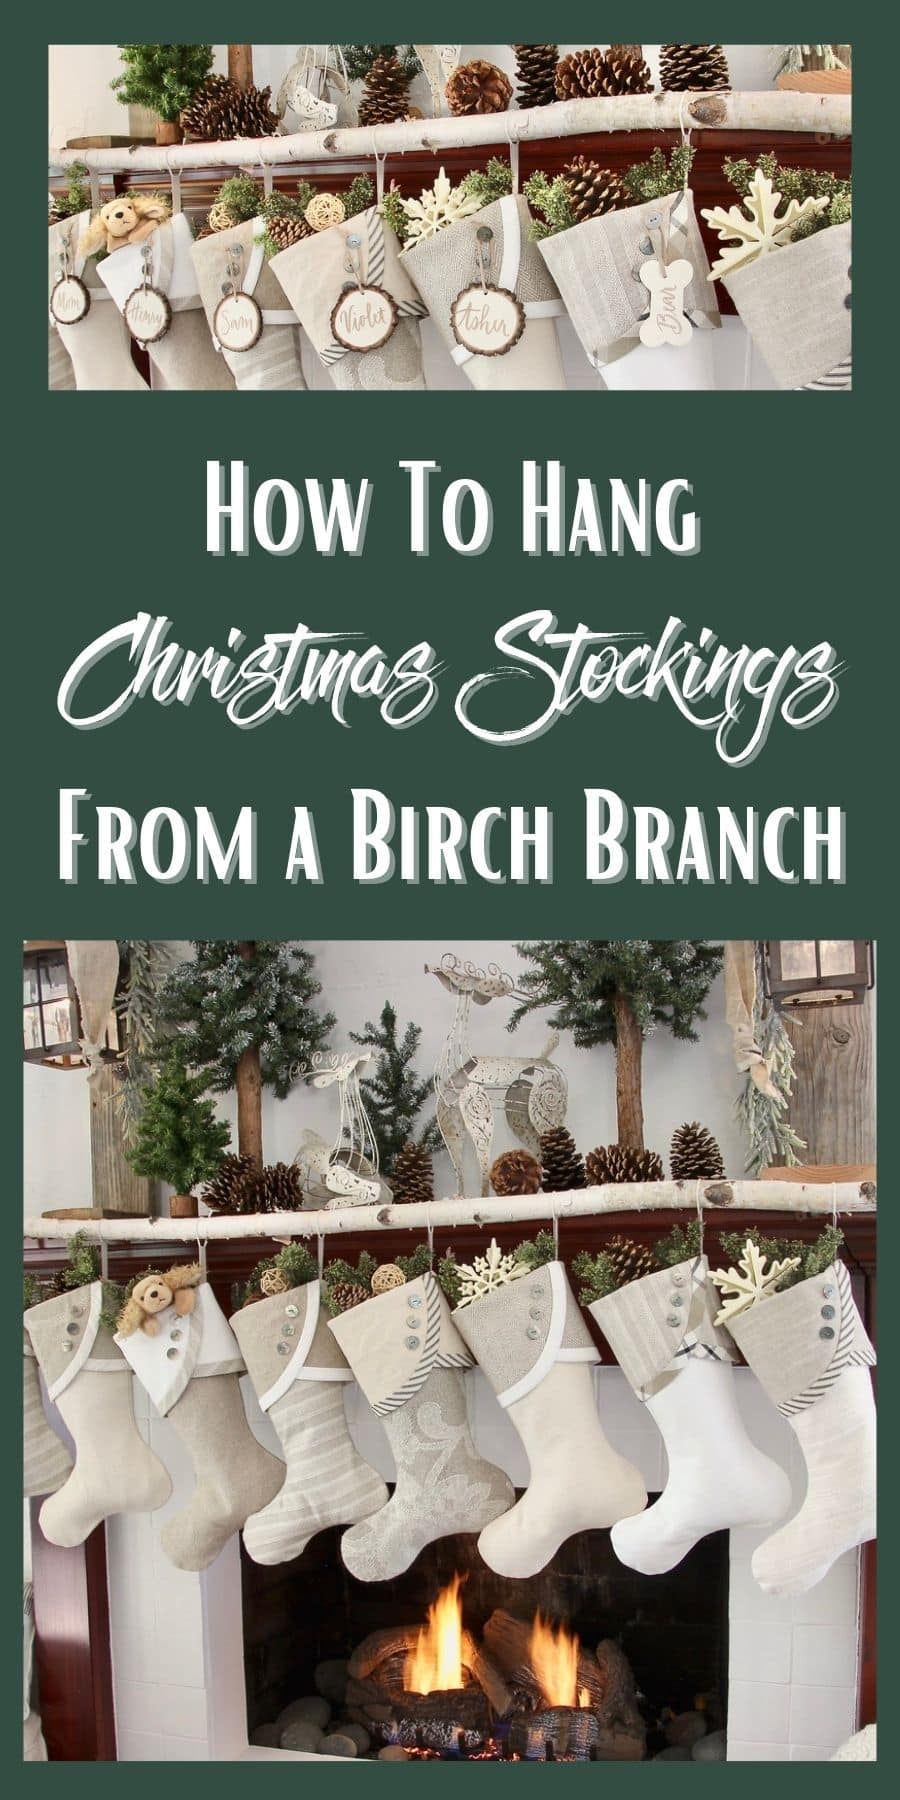 Pinterest Pin Showing a wide closeup and afull image of 8 Farmhouse Christmas stockings hanging from a birch branch on a wood mantel